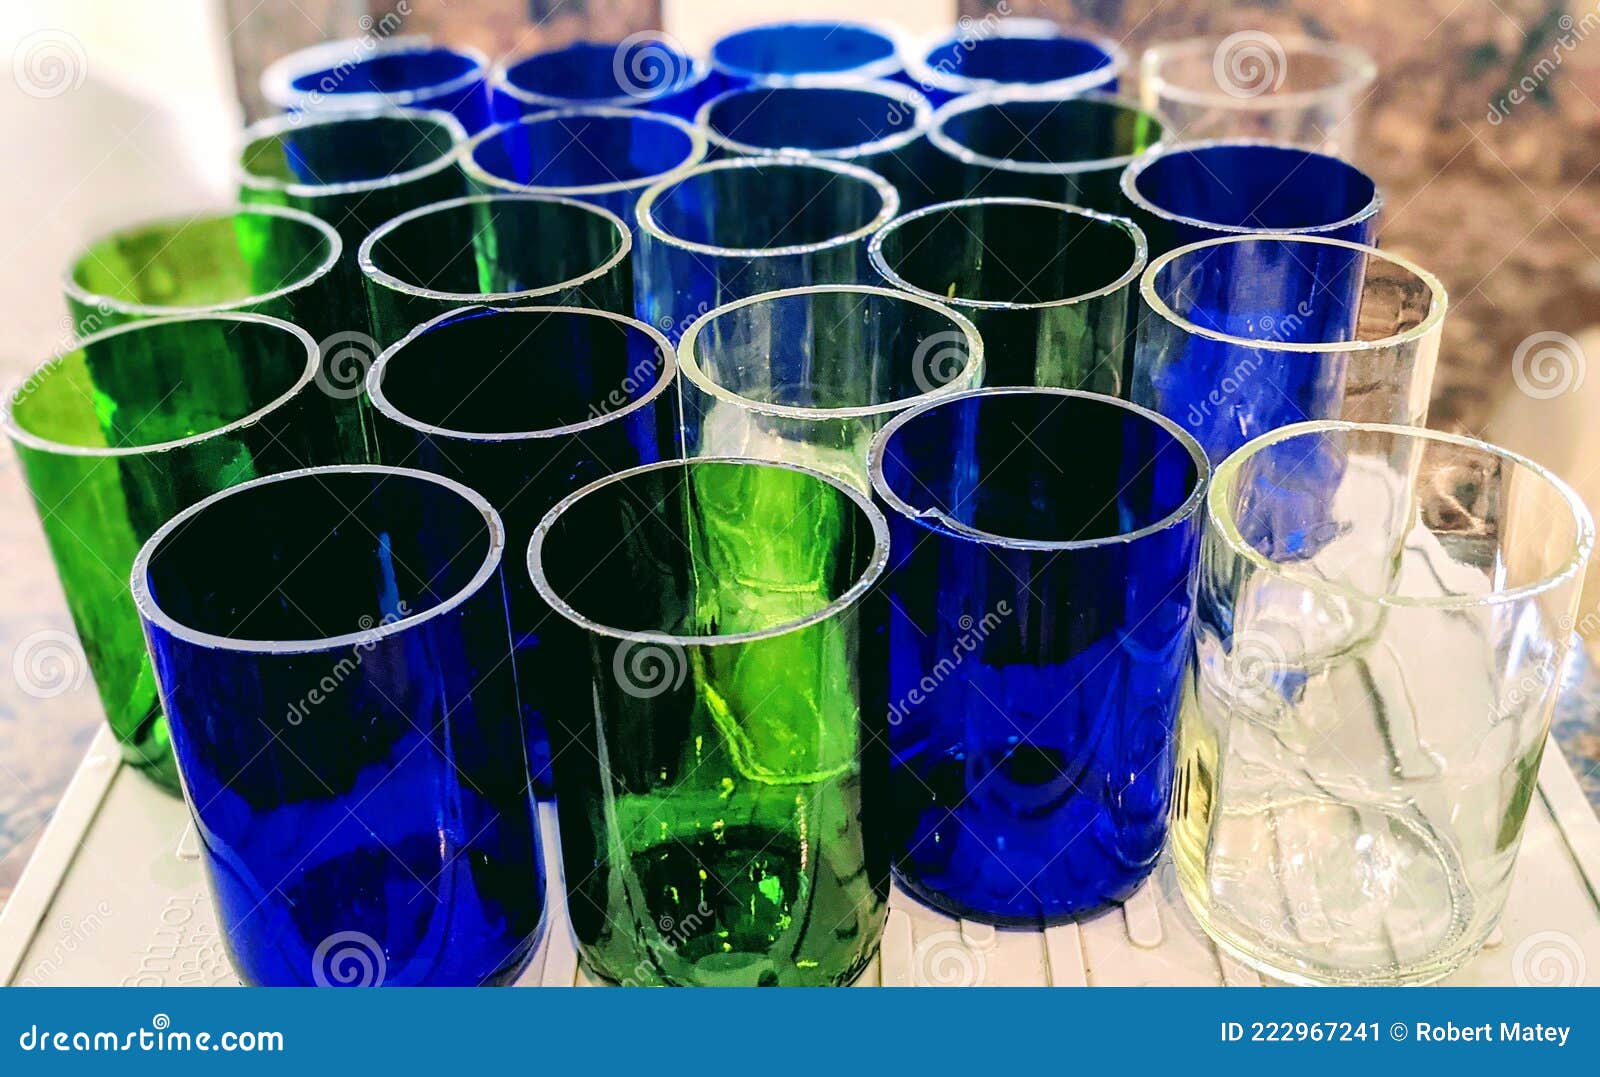 https://thumbs.dreamstime.com/z/cut-recycled-glass-wine-bottles-ready-to-be-made-drinking-glasses-candles-diamond-green-blue-clear-recycle-222967241.jpg